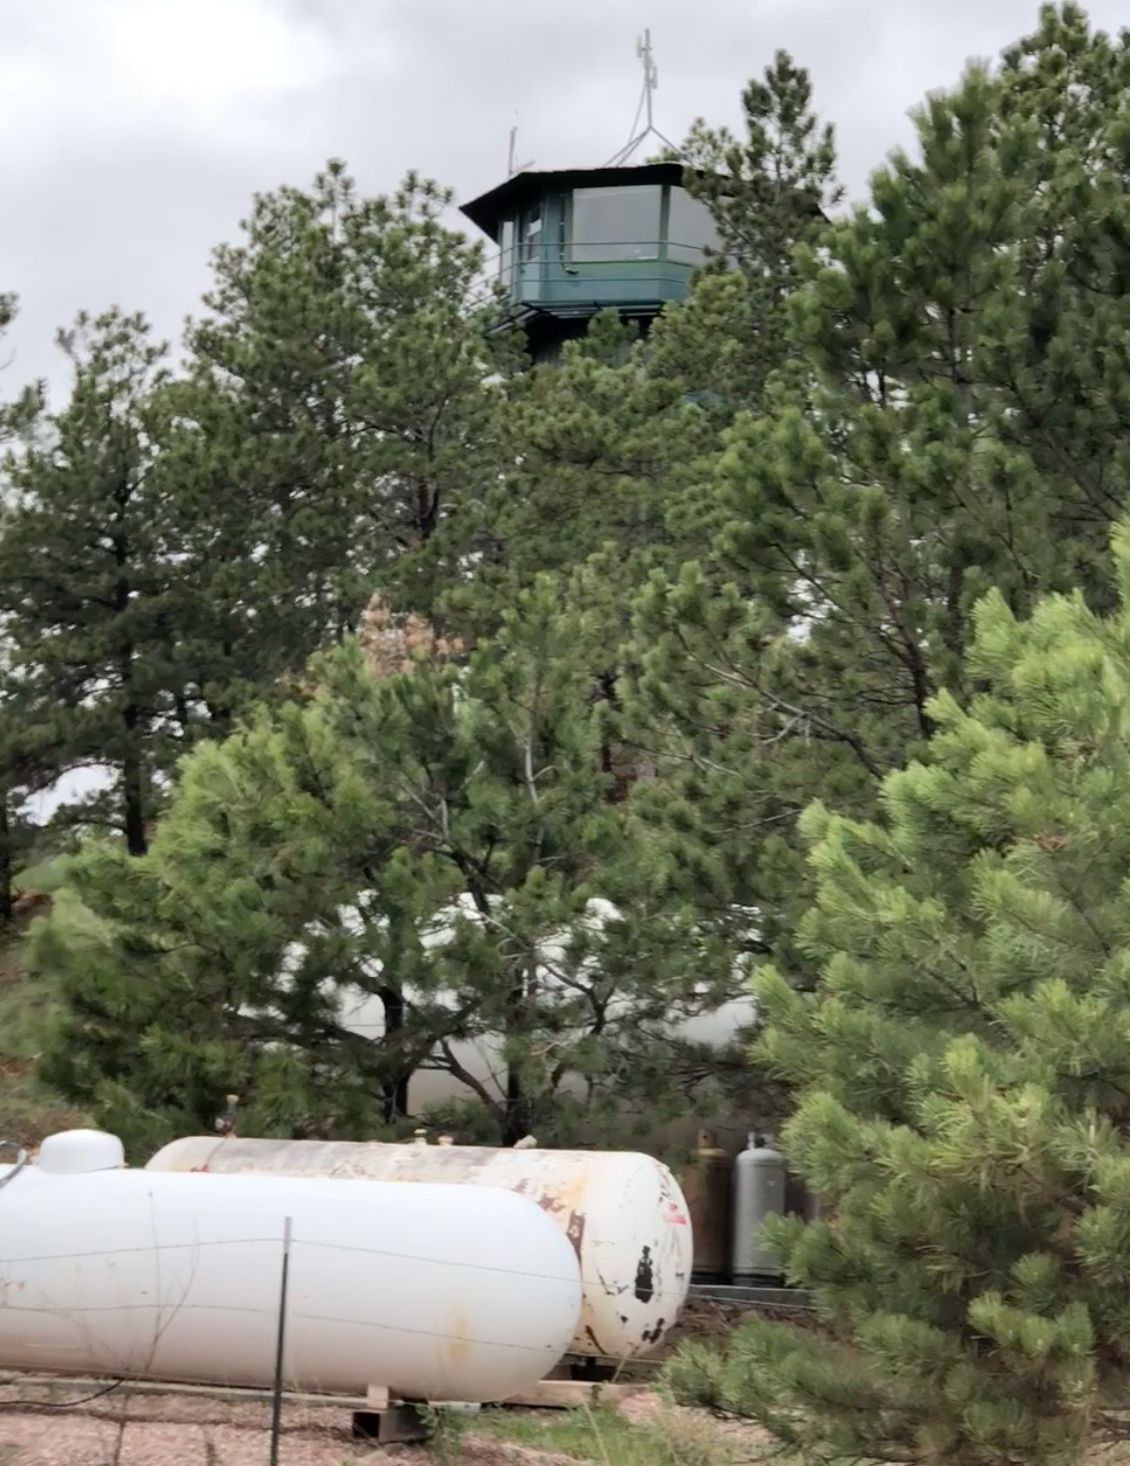 Guard Tower sticking out of tree tops